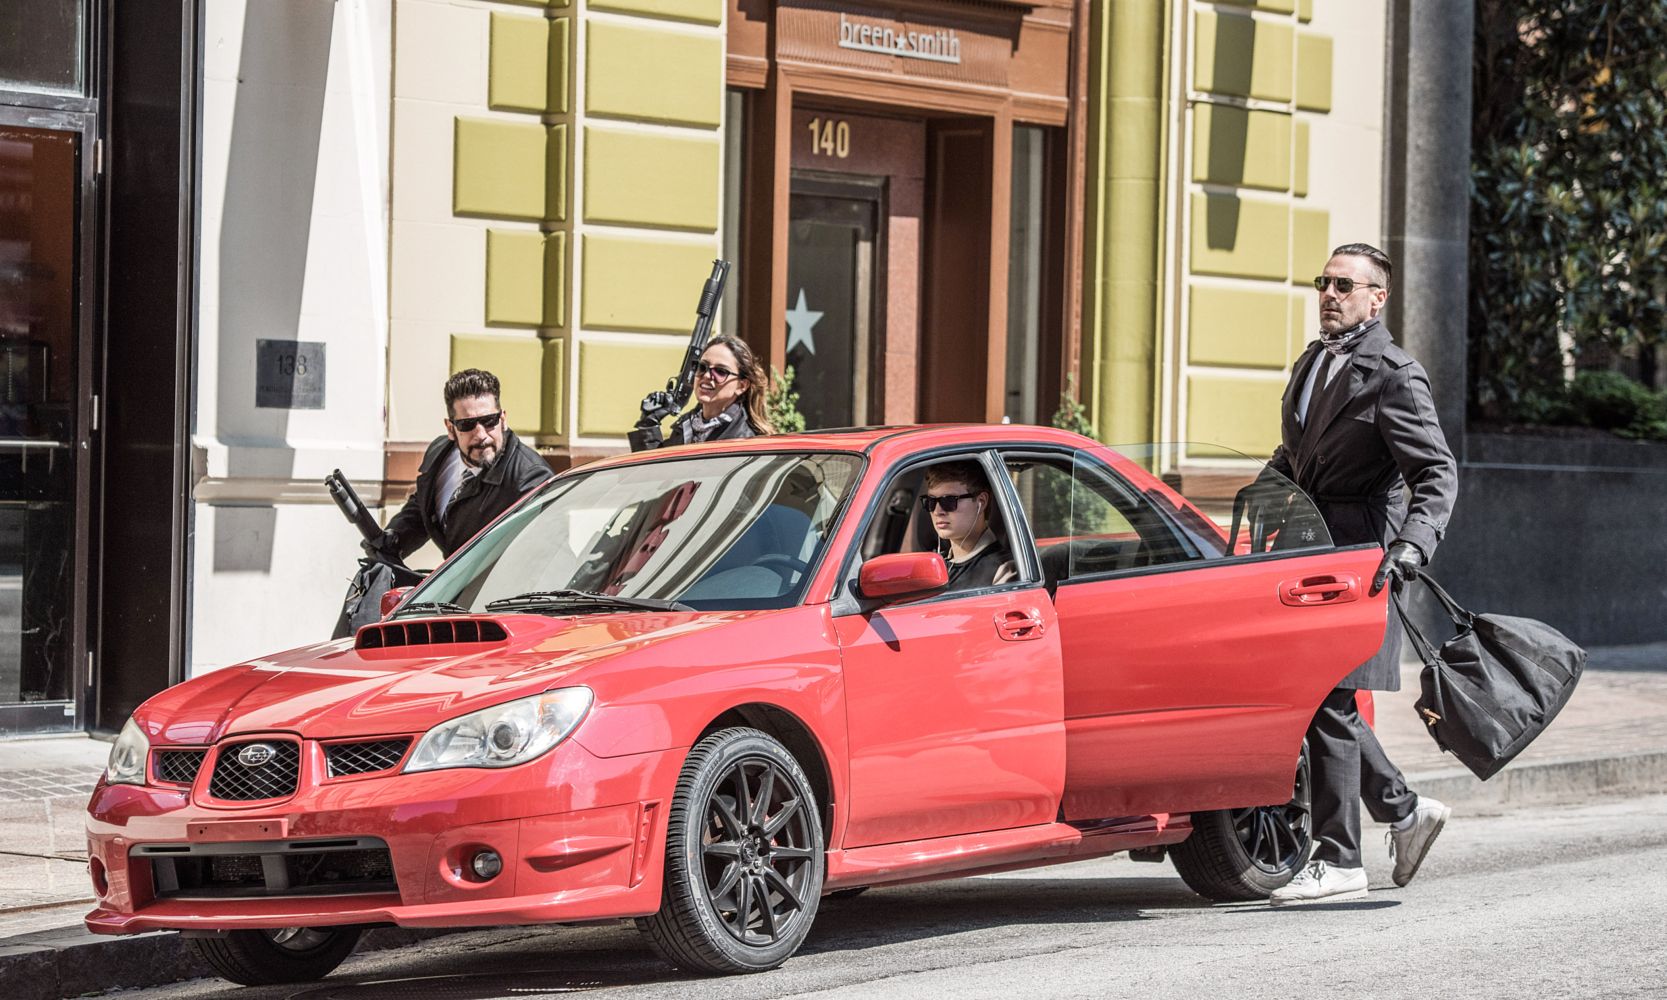 <p>Edgar Wright’s distinct cocktail of action, humor, whimsical camerawork, and electrifying soundtracks have never been better suited to a canvas than ‘Baby Driver.’ The 2017 blockbuster stars Ansel Elgort as a lightning fast getaway driver whose tinnitus requires him to listen to music at all hours of the day.</p> <p>The story of a criminal looking to earn his release from the underworld with one last job has been told time and time again, but Wright elevates the premise into something truly special with his intricately choreographed car chase sequences, each one paired with a carefully selected rock song. Seven years after its release, ‘Baby Driver’ remains a shining symbol of what’s possible when a visionary filmmaker gets the right resources to support their aims.</p>